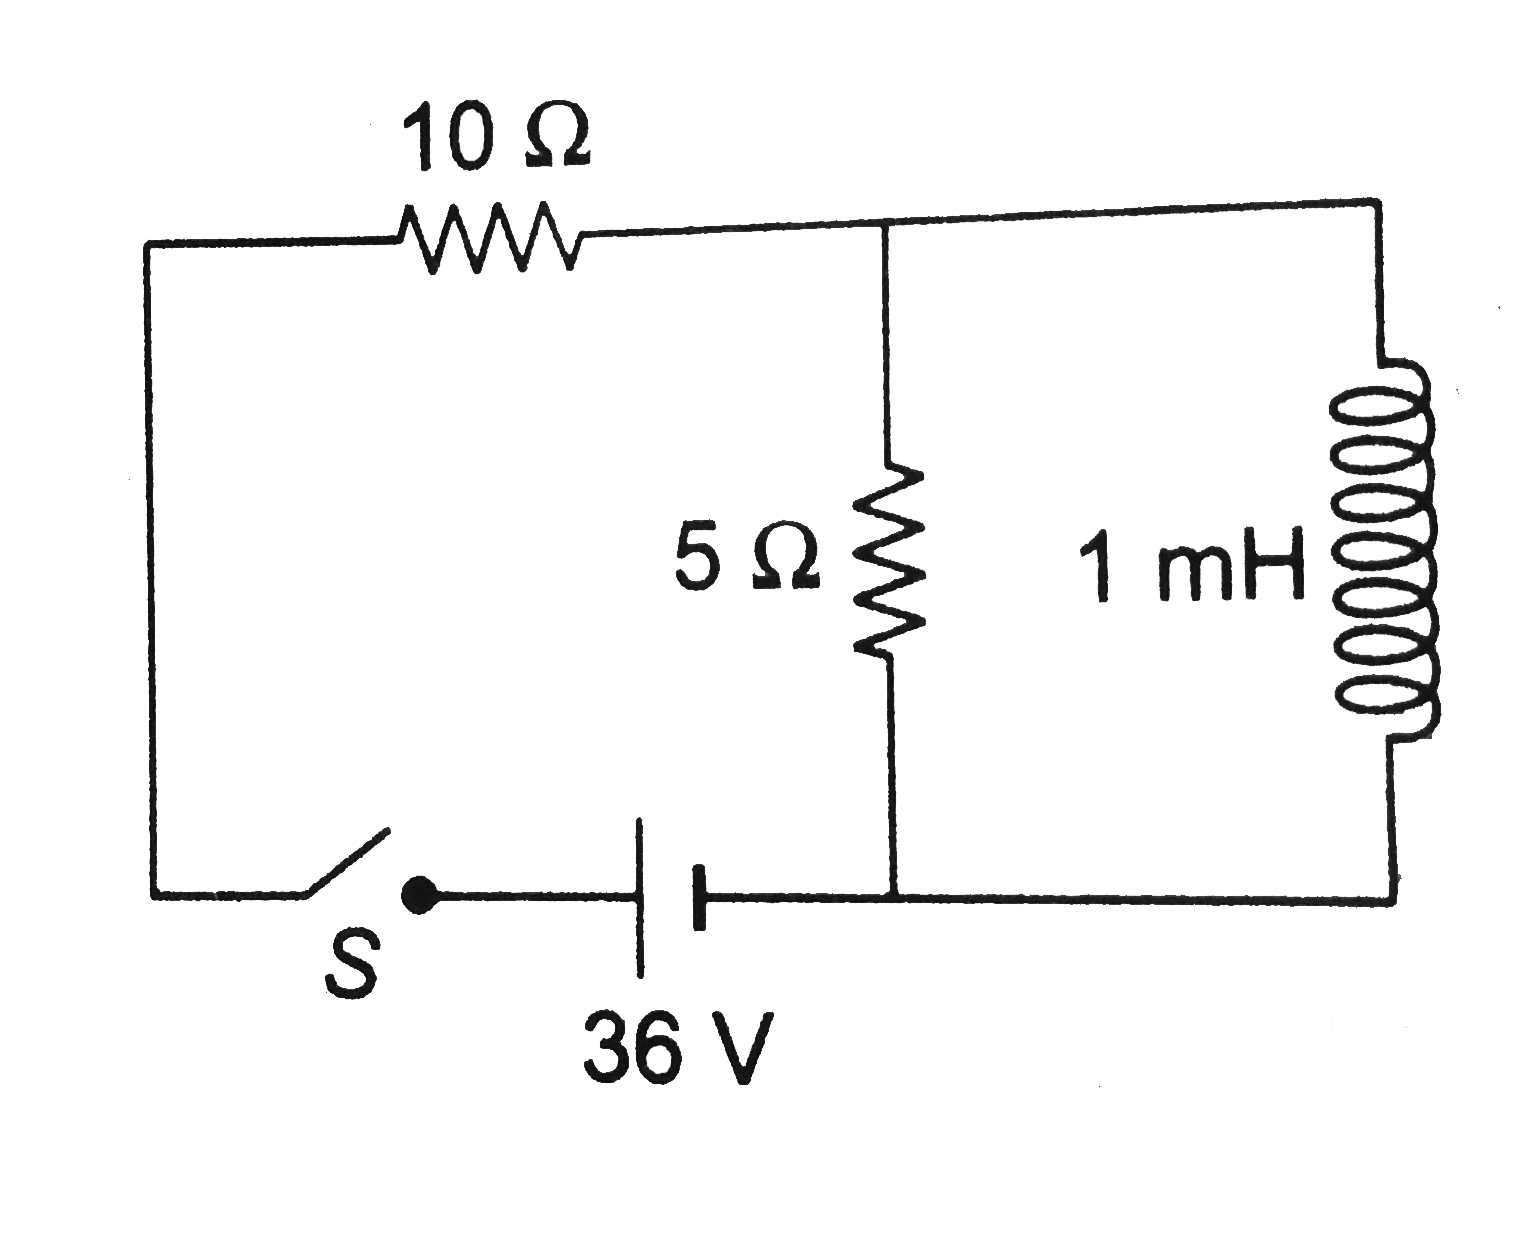 In the circuit arrangement shown in figure, the switch S is closed at t = 0. Find the current in the inductance as a function of time? Does the current through 10 Omega resistor vary with time or remains constant.